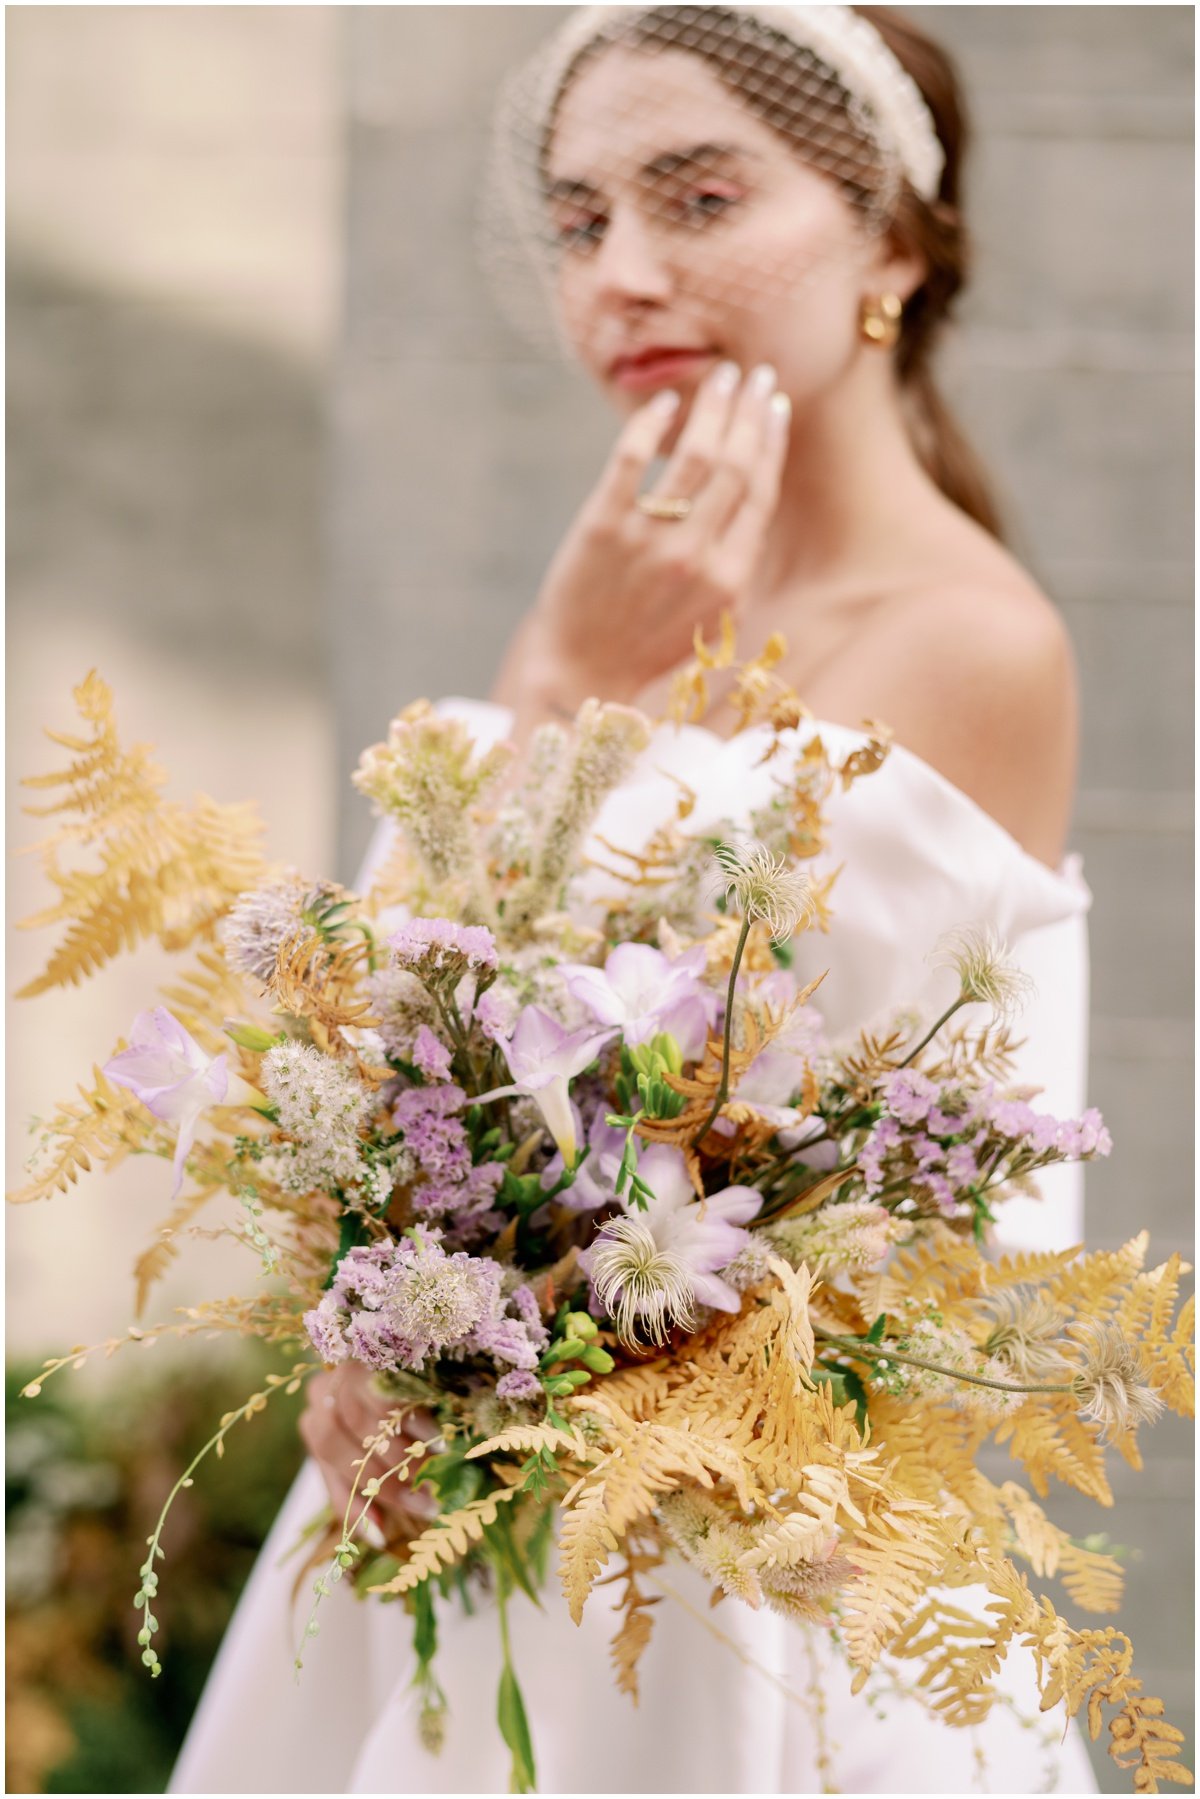 Bride wearing off the shoulder dress and headband carry bouquet of muted purple and yellow flowers | NKB Photo